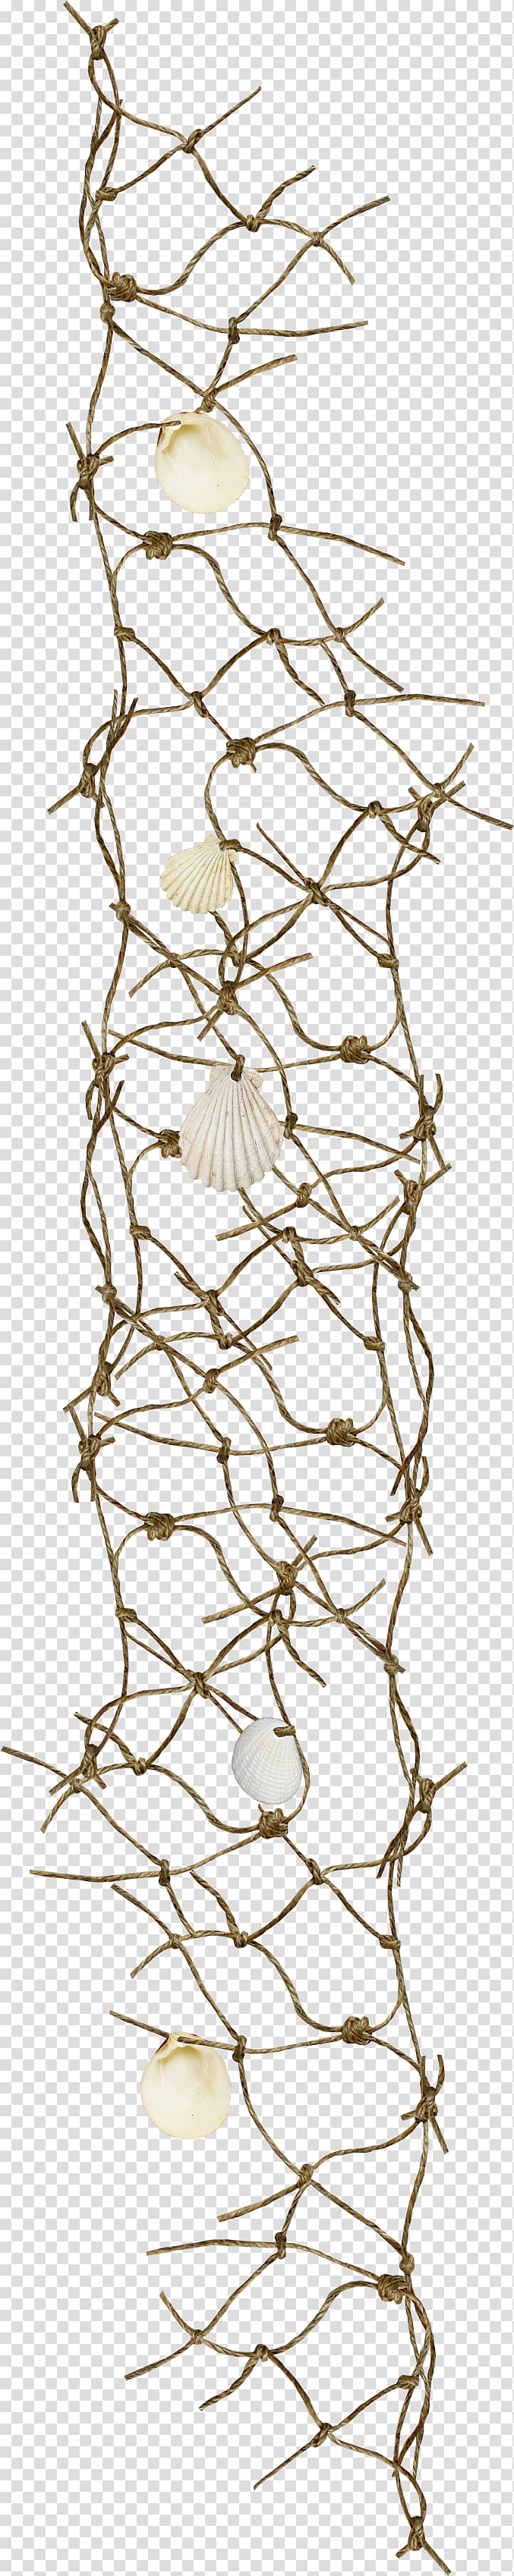 sea shell on vines illustration, Fishing net Rope , Brown rope nets scallop transparent background PNG clipart